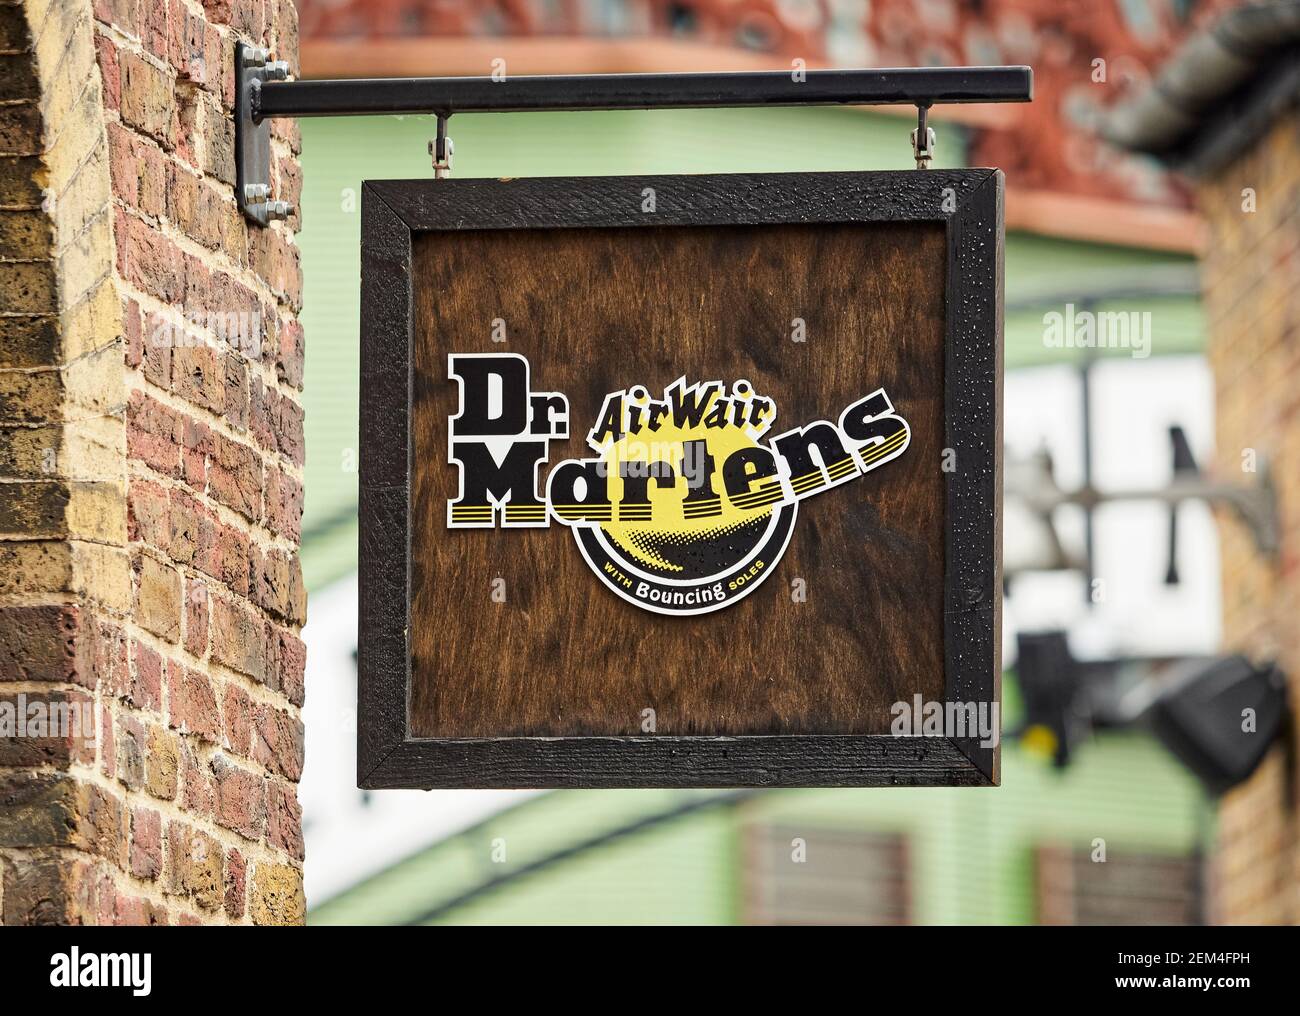 Dr Martens Sign outside shoe shop, Dr Martens footwear was founded in 1947  by Klaus Martens, London, England Stock Photo - Alamy